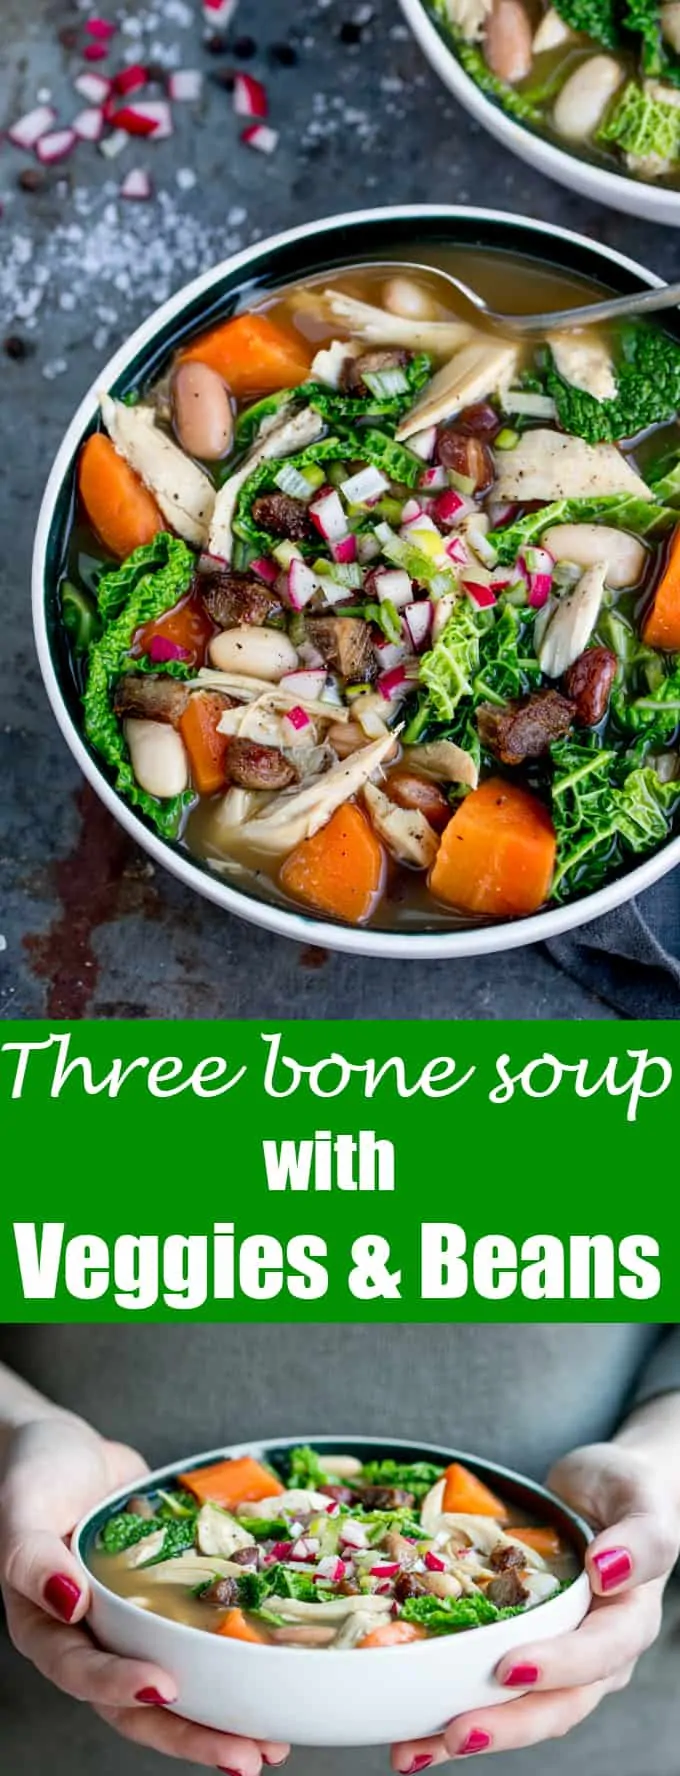 This Three Bone Soup With Veggies and Beans is a great way to make the most of your leftovers! Filling, tasty and easily made gluten free too!